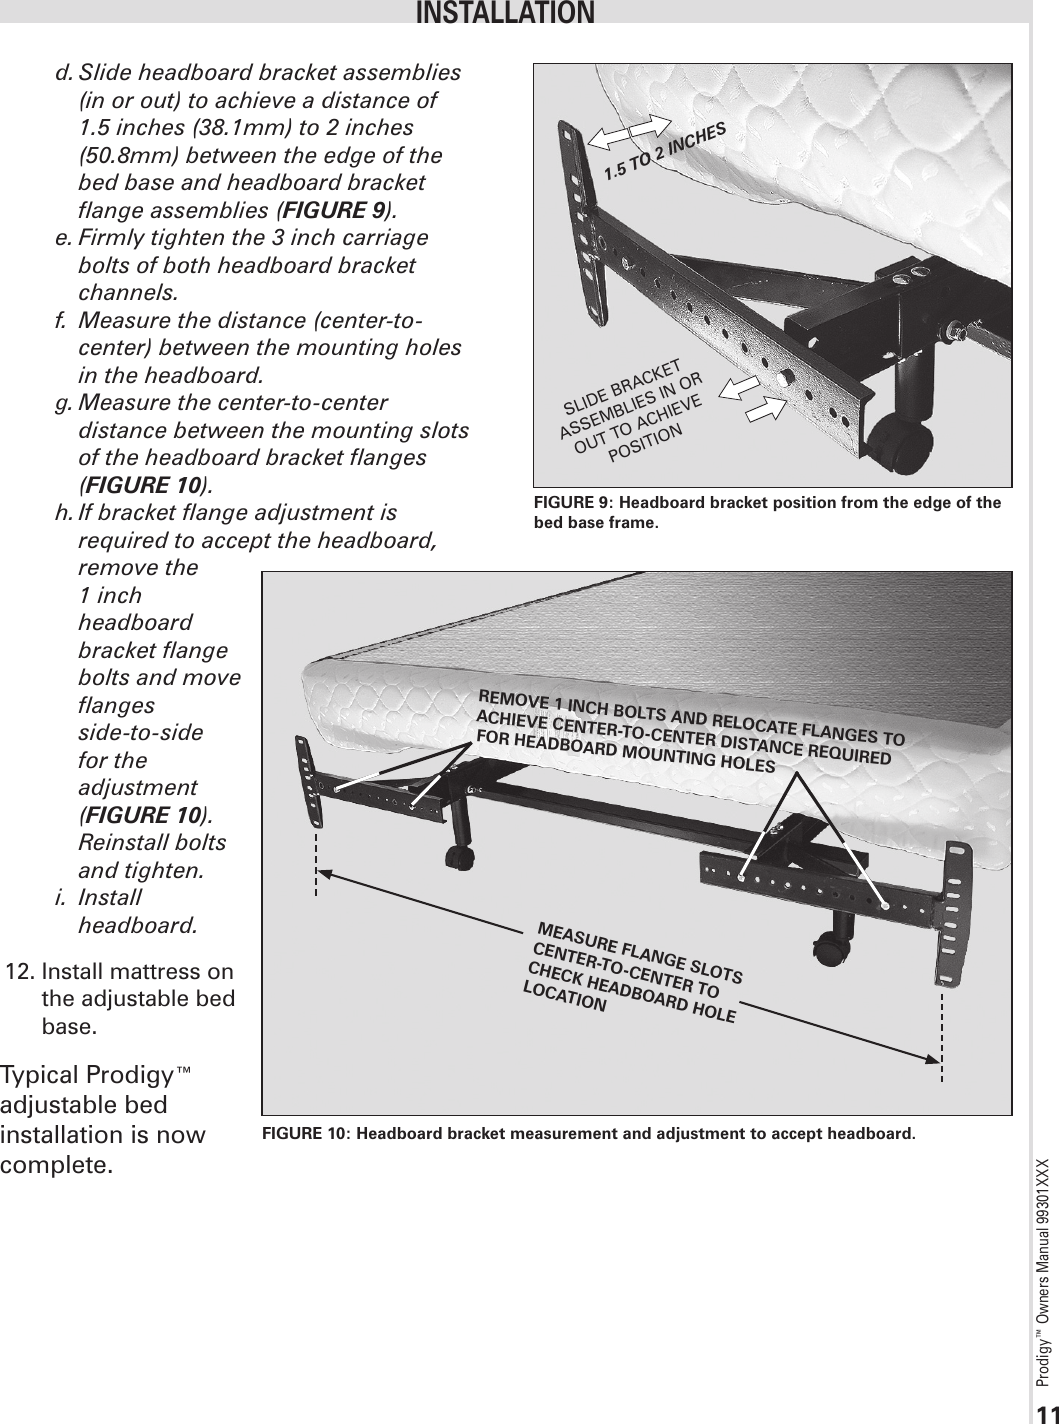 Prodigy™ Owners Manual 99301XXX11d. Slide headboard bracket assemblies (in or out) to achieve a distance of 1.5 inches (38.1mm) to 2 inches (50.8mm) between the edge of the bed base and headboard bracket flange assemblies (FIGURE 9).e. Firmly tighten the 3 inch carriage bolts of both headboard bracket channels.f.  Measure the distance (center-to-center) between the mounting holes in the headboard.g. Measure the center-to-center distance between the mounting slots of the headboard bracket flanges (FIGURE 10).h. If bracket flange adjustment is required to accept the headboard, remove the   1 inch   headboard   bracket flange   bolts and move   flanges   side-to-side   for the   adjustment  (FIGURE 10).   Reinstall bolts   and tighten.i.  Install   headboard. 12. Install mattress on   the adjustable bed   base.Typical Prodigy™  adjustable bed  installation is now complete.1.5 TO 2 INCHESSLIDE BRACKET ASSEMBLIES IN OR OUT TO ACHIEVE POSITIONFIGURE 9: Headboard bracket position from the edge of the bed base frame.INSTALLATIONREMOVE 1 INCH BOLTS AND RELOCATE FLANGES TO ACHIEVE CENTER-TO-CENTER DISTANCE REQUIRED FOR HEADBOARD MOUNTING HOLES MEASURE FLANGE SLOTS CENTER-TO-CENTER TO CHECK HEADBOARD HOLE LOCATIONFIGURE 10: Headboard bracket measurement and adjustment to accept headboard. 